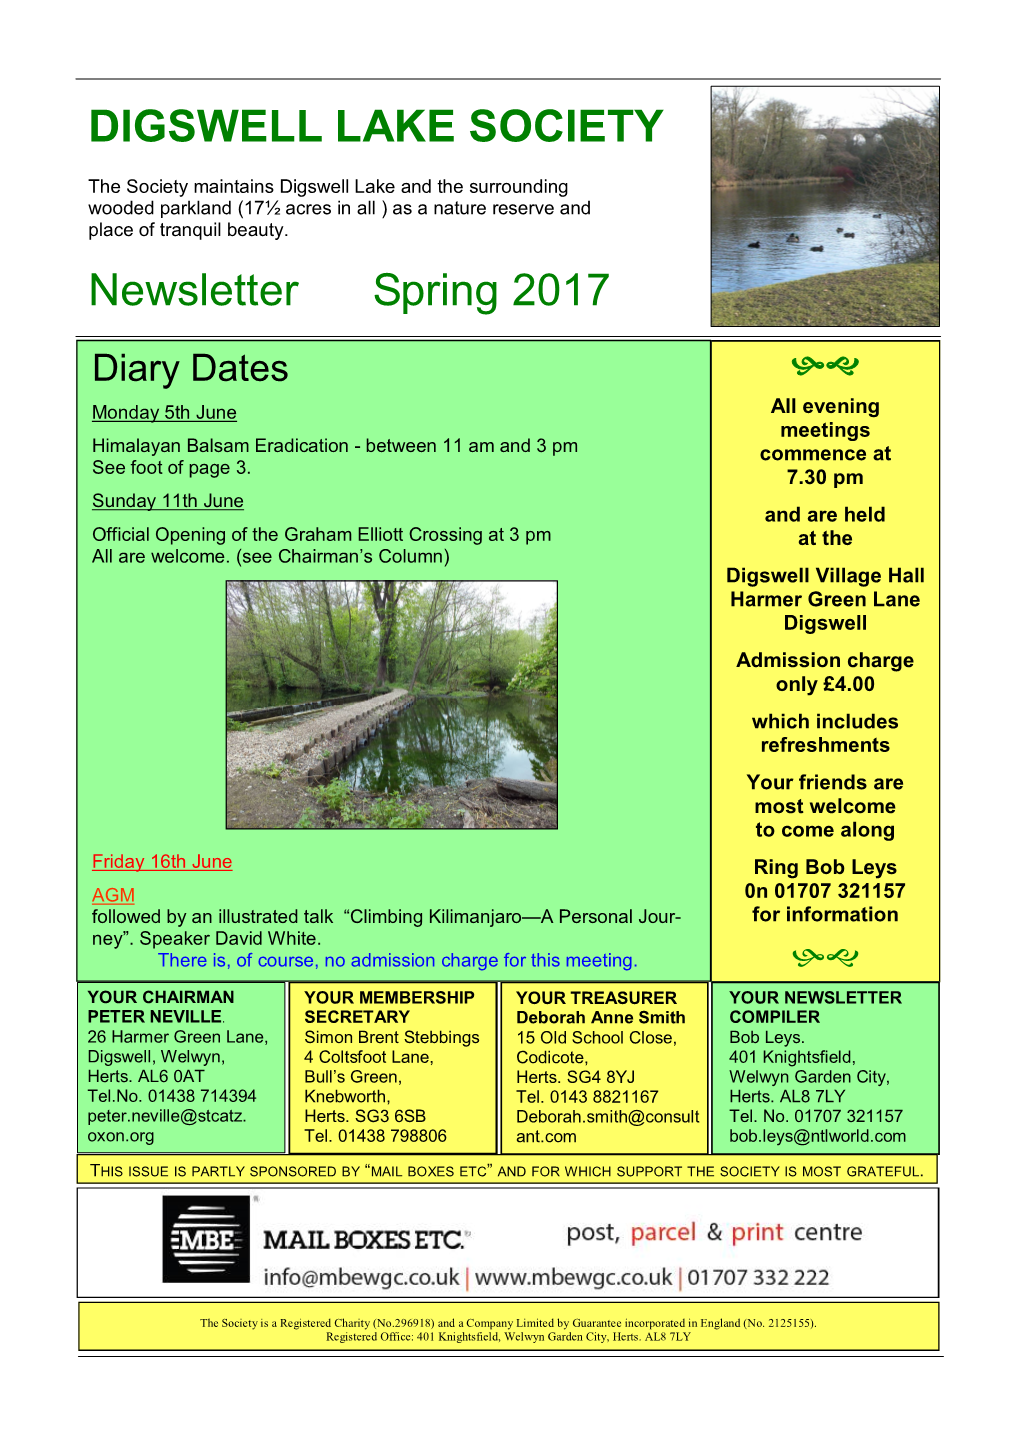 DIGSWELL LAKE SOCIETY Newsletter Spring 2017